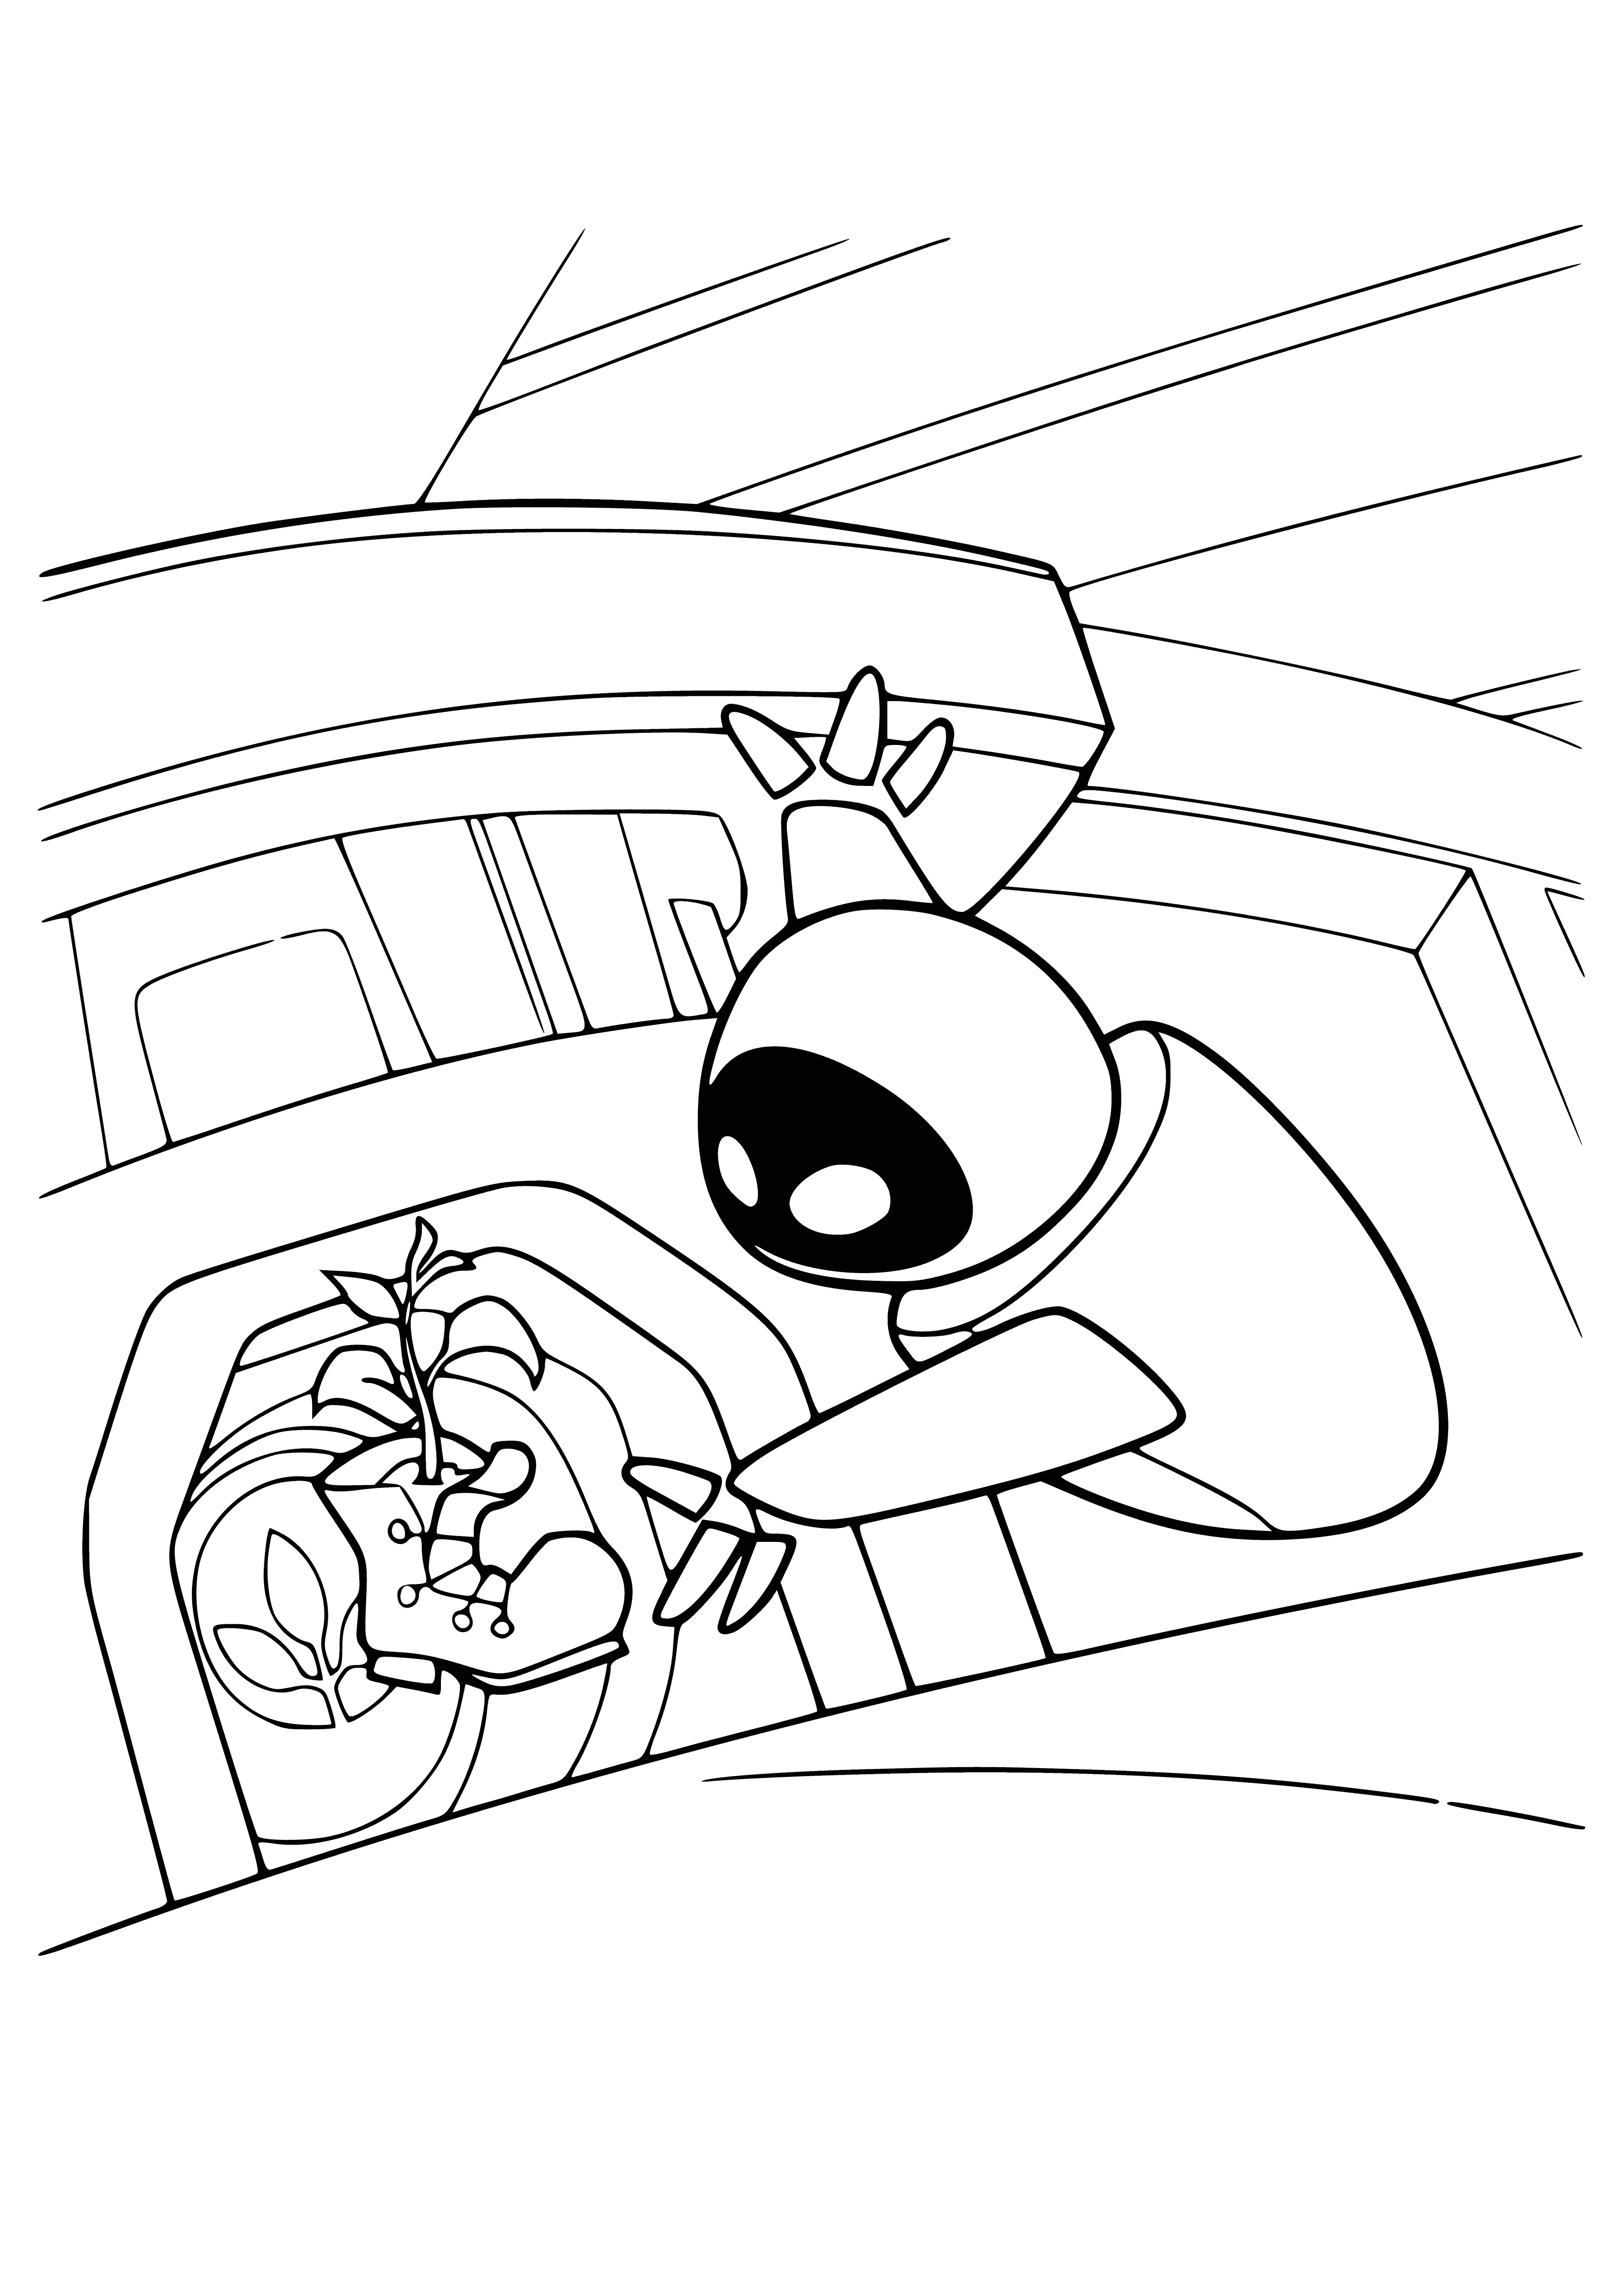 Eve and the plant coloring page